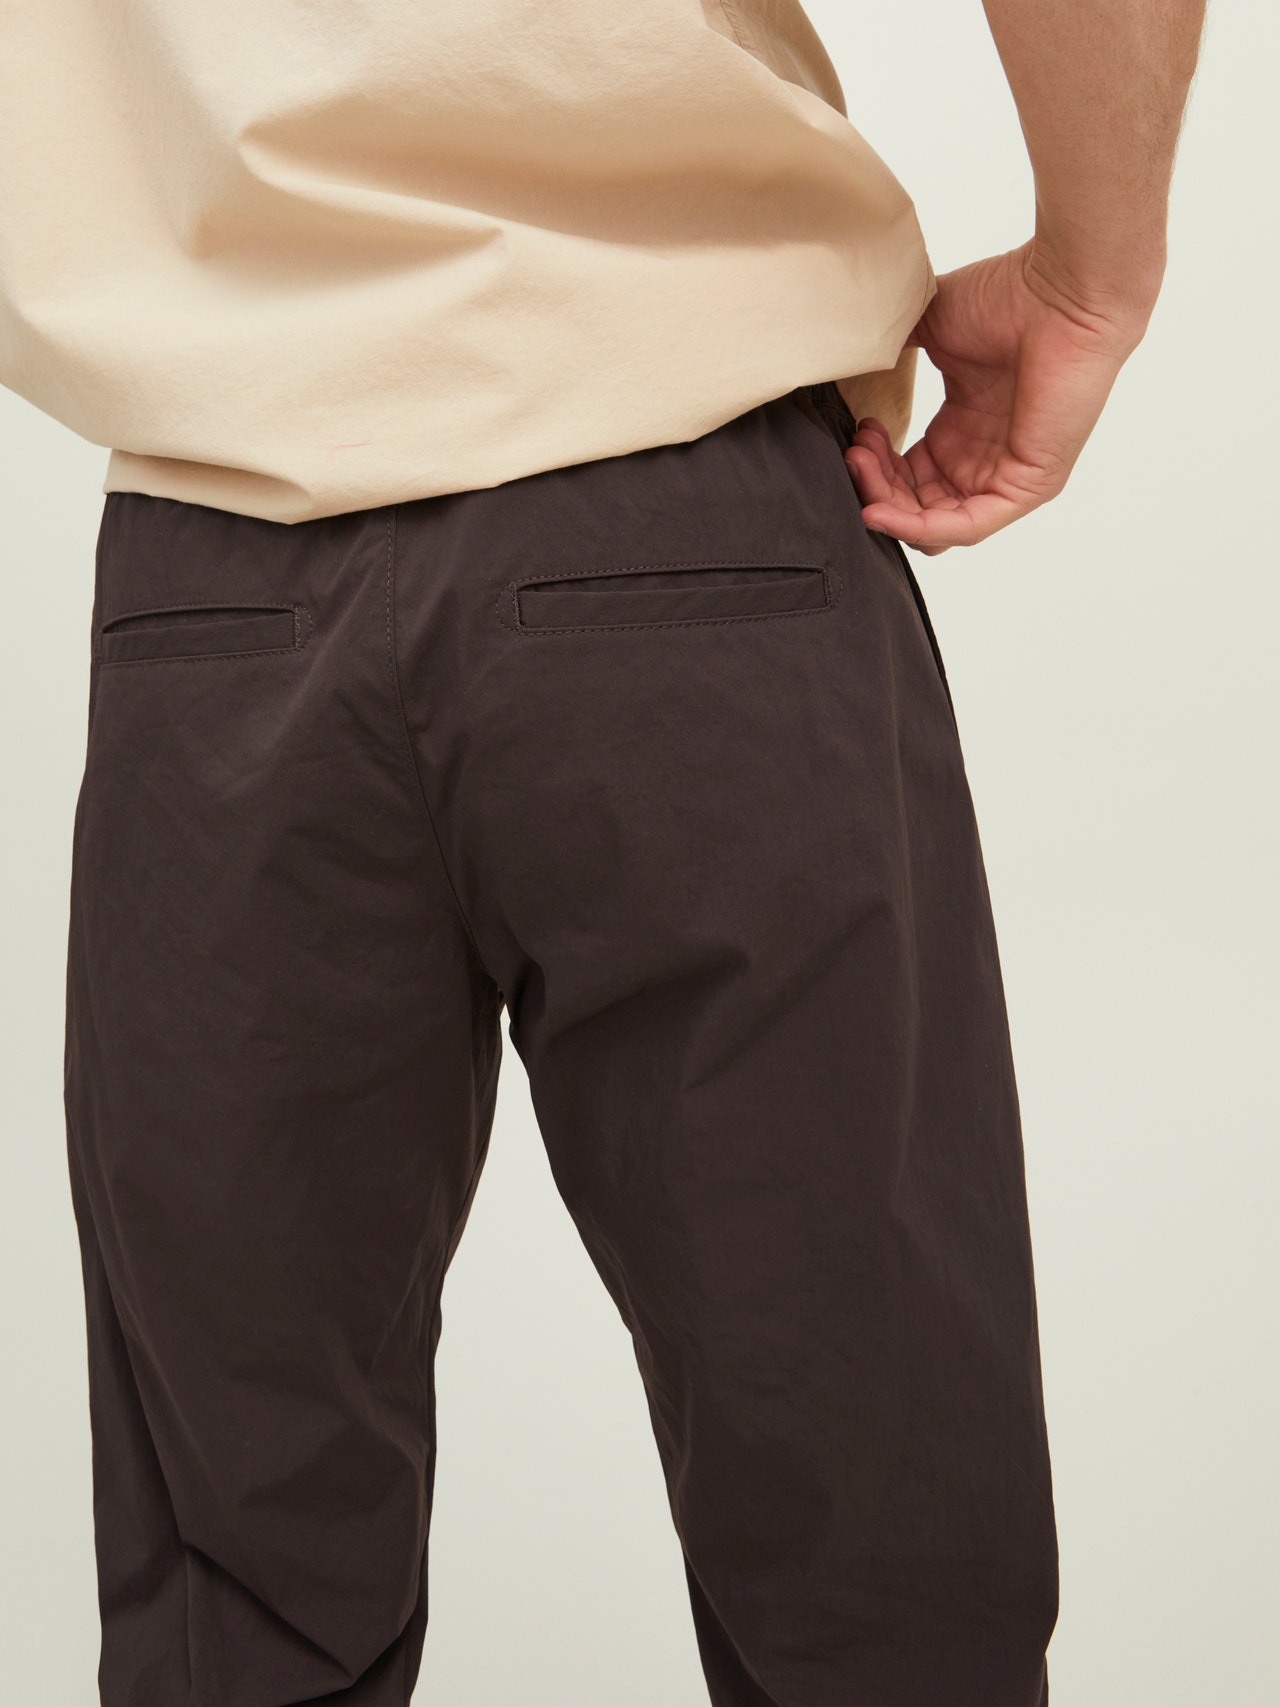 Jack & Jones Relaxed Fit Chino trousers -Seal Brown - 12219318